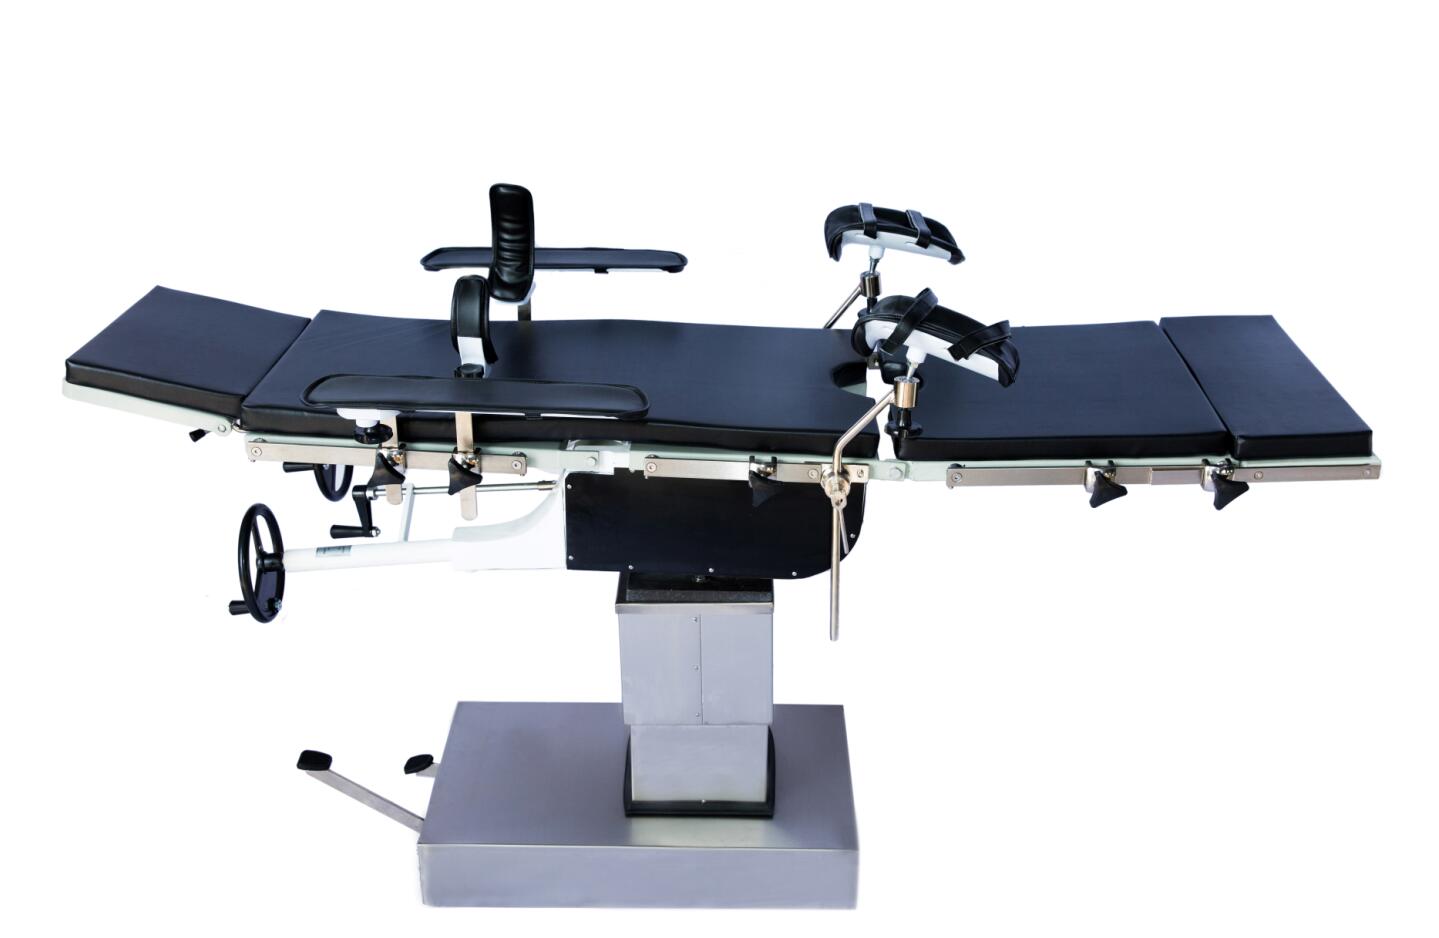 SXS3008-I 3008-II Head-operated integrated operating table